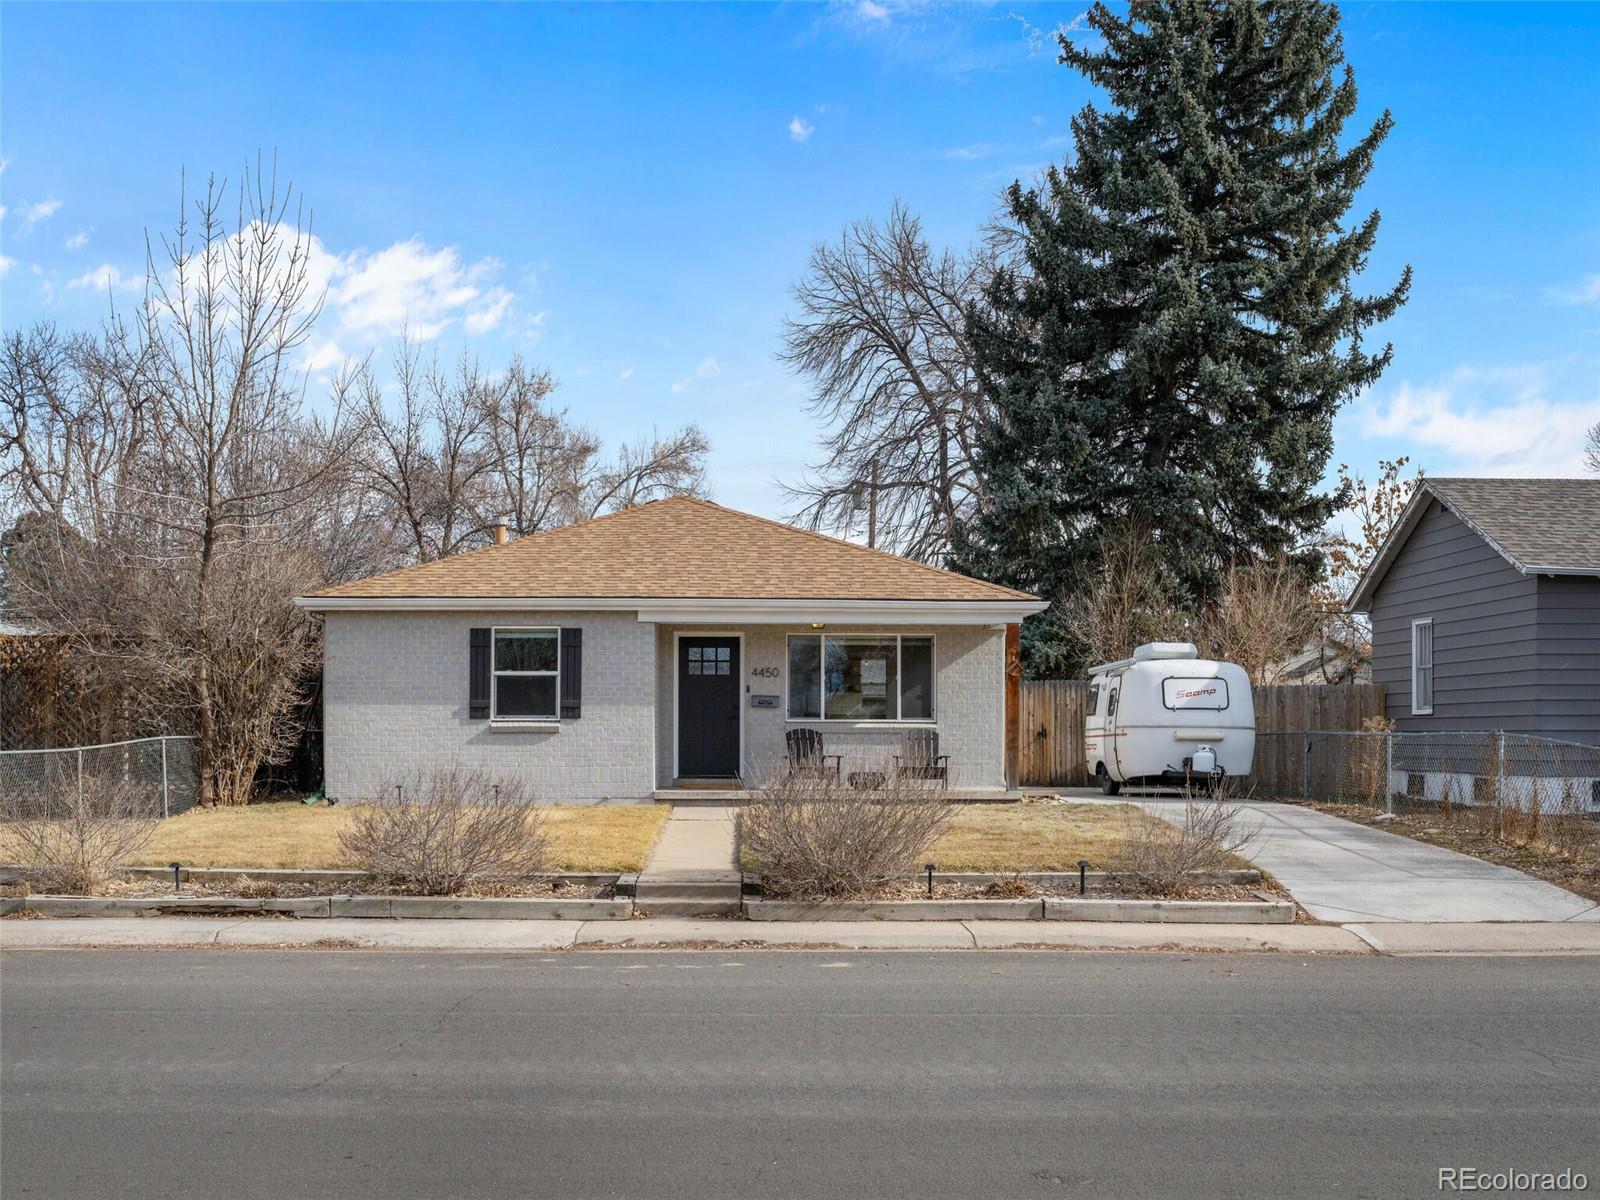 4450 s sherman street, Englewood sold home. Closed on 2024-03-08 for $545,000.